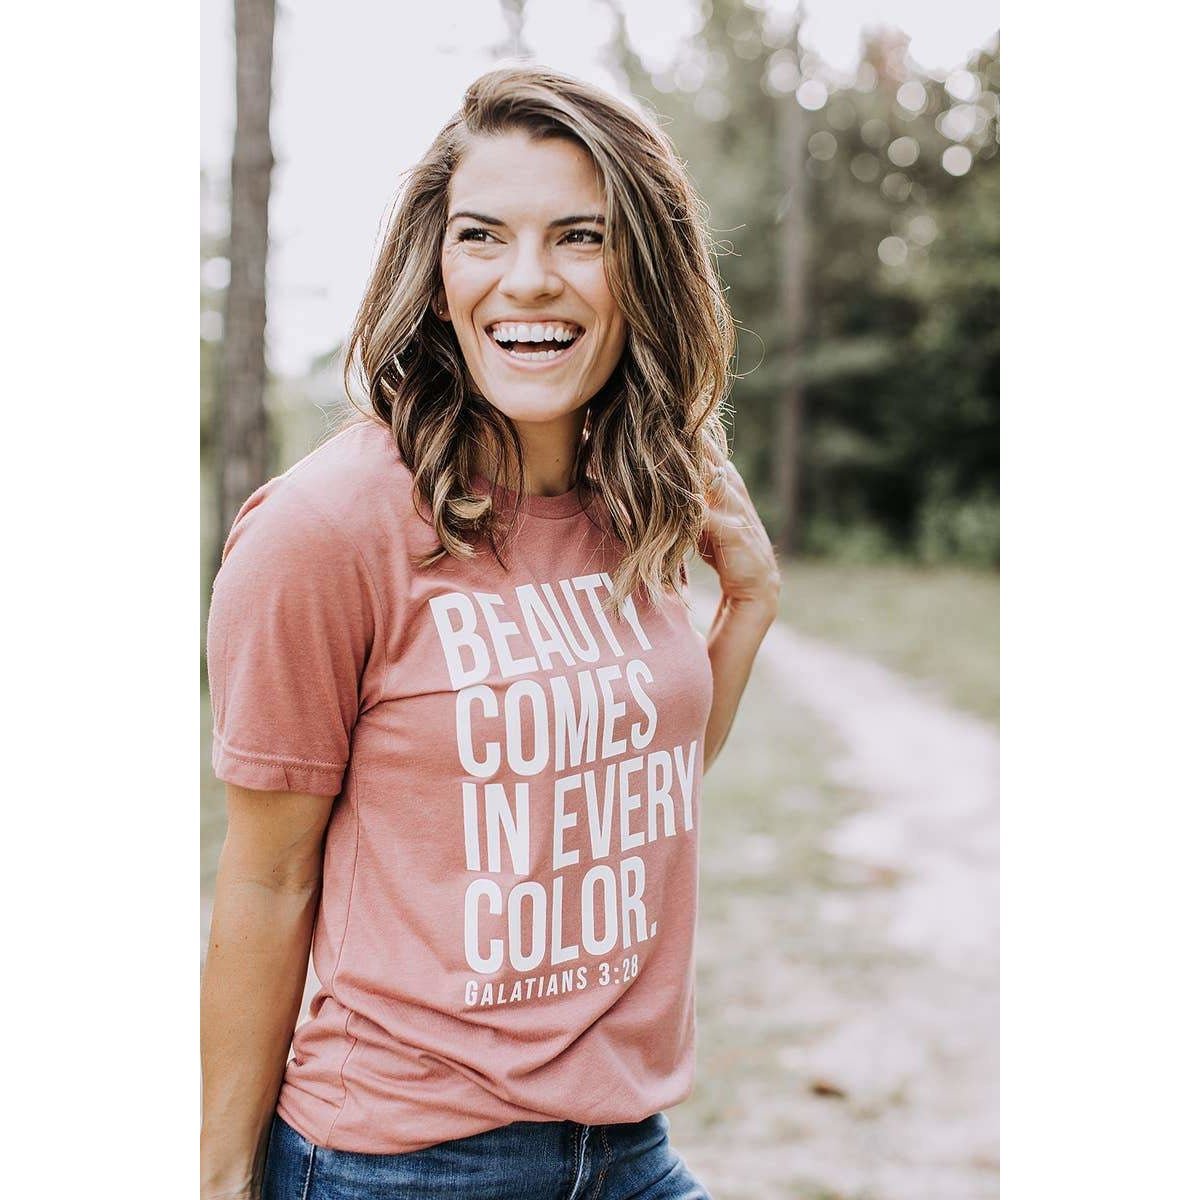 Beauty Comes in All Colors - Women's Tee - Global Hues Market